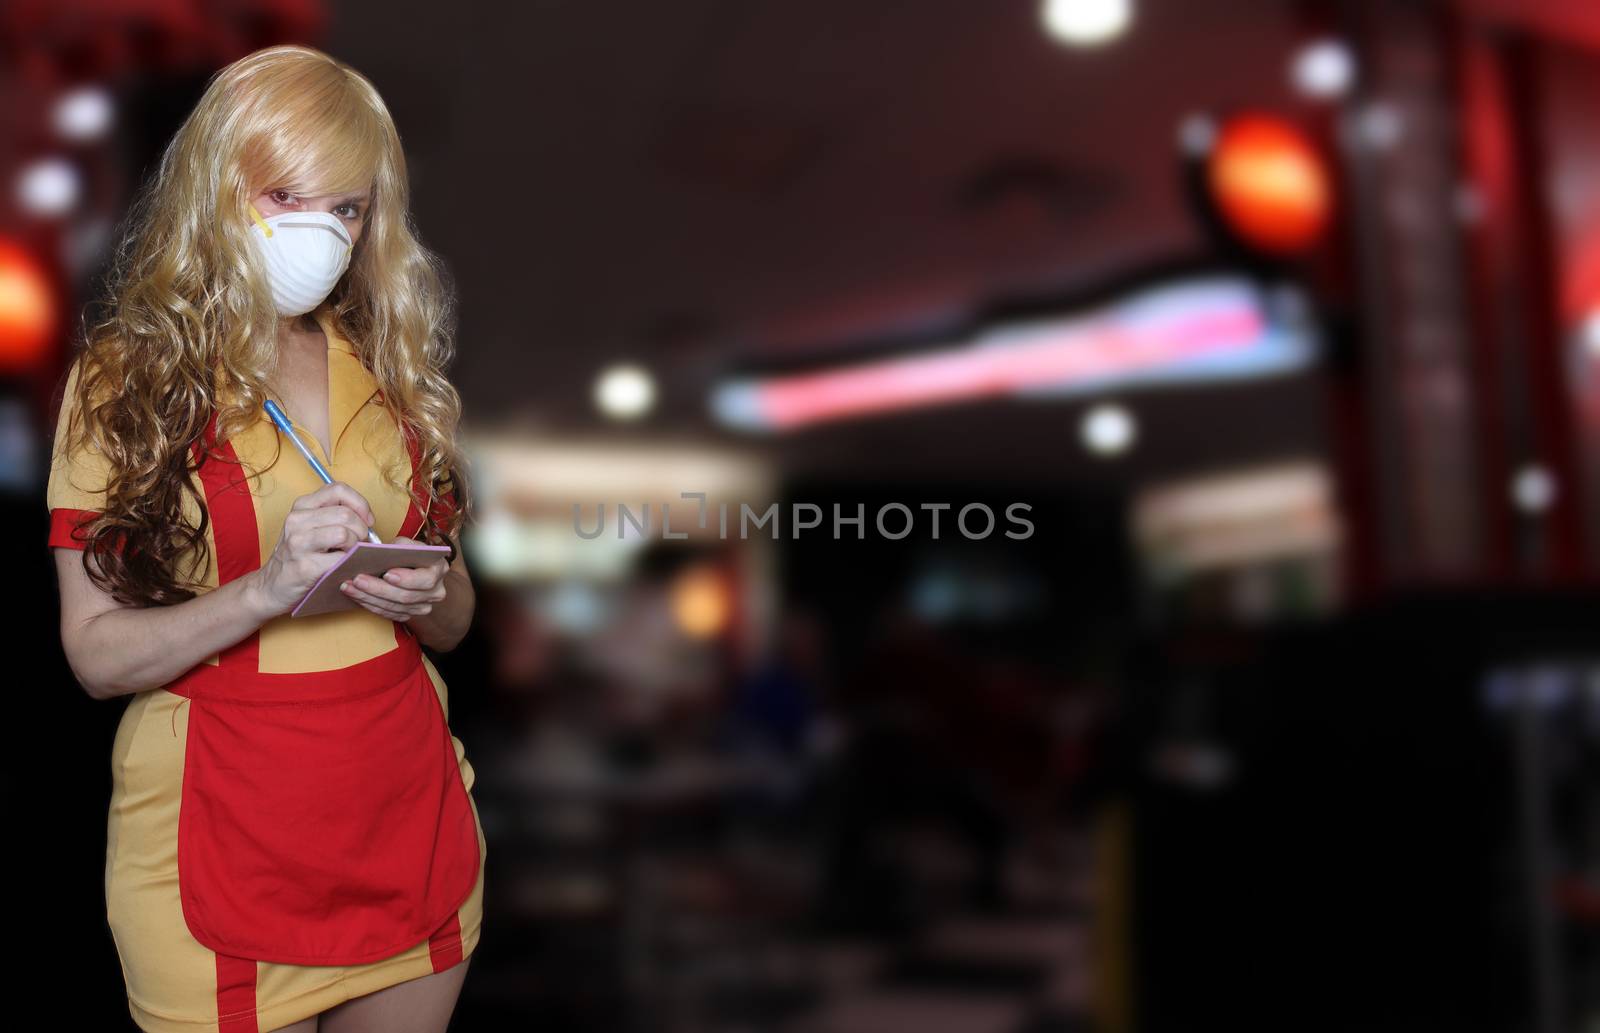 Waitress Wearing N95 Mask With Blurred Restaurant Background